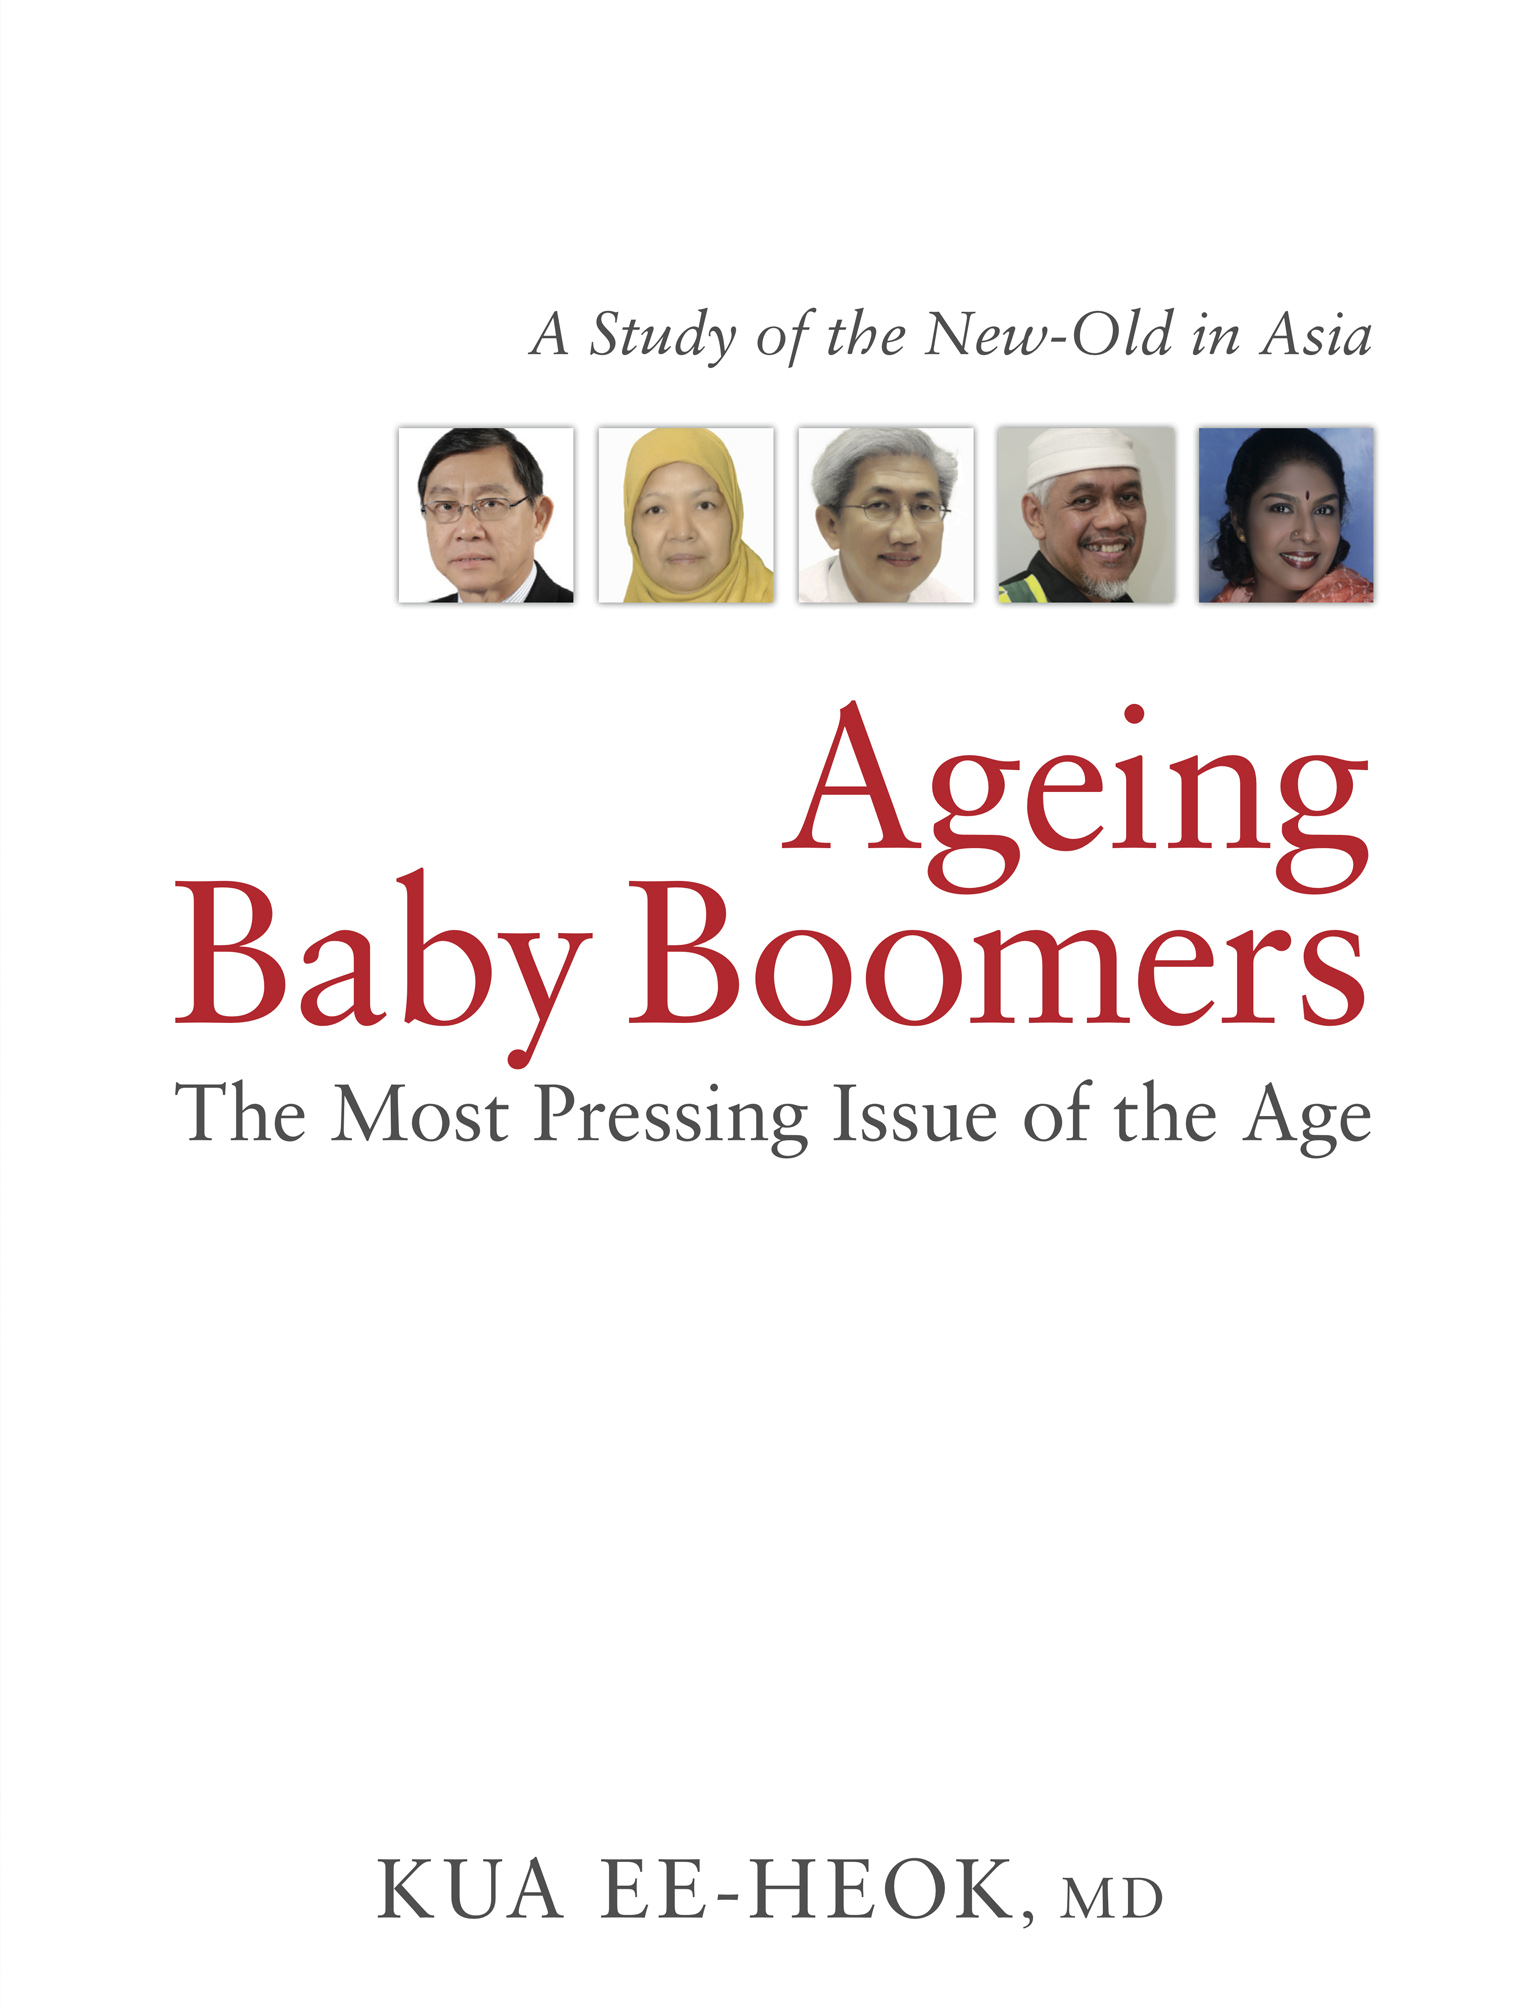 Ageing Baby Boomers